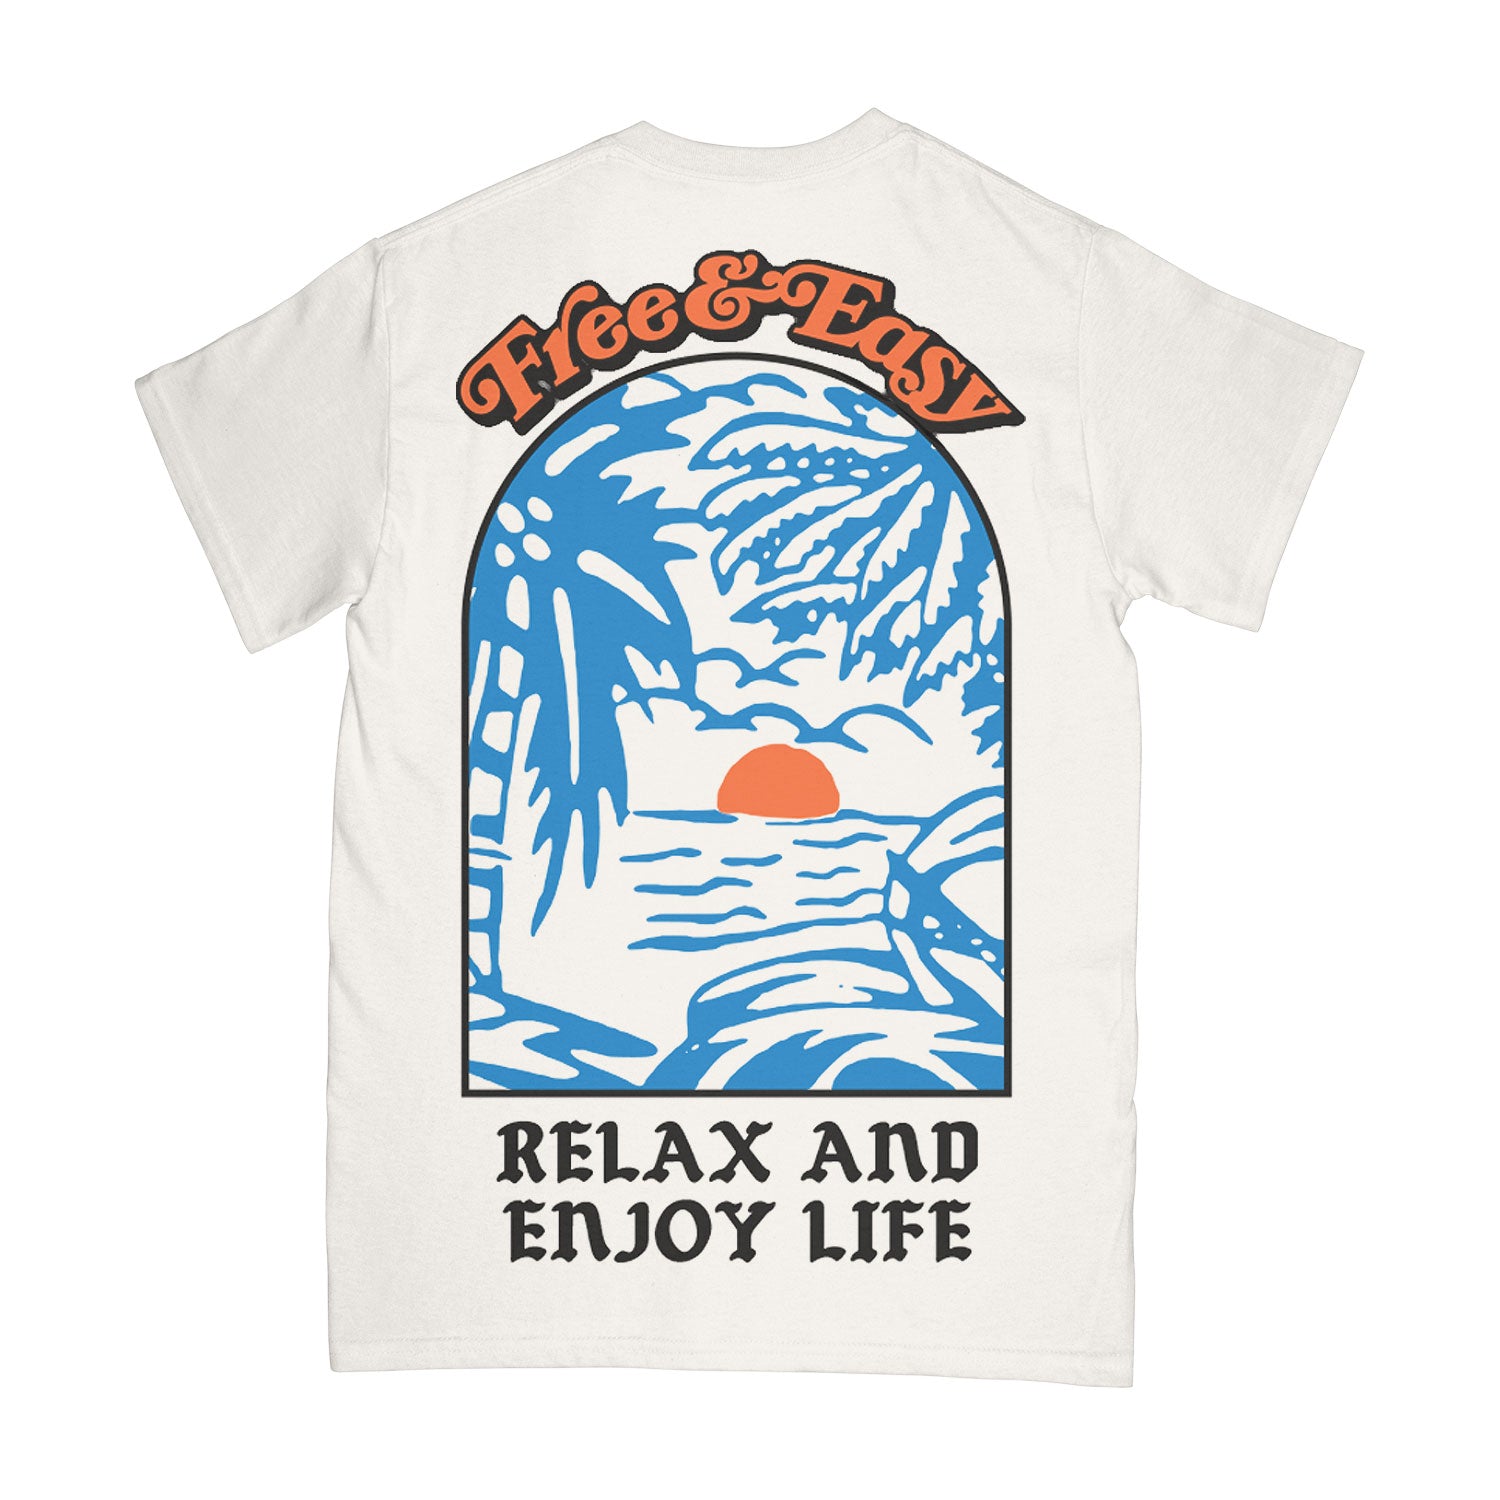 Paradise Short Sleeve Pocket Tee in white with orange, blue, and black Free & Easy Relax and Enjoy Life design on back on a white background - Free & Easy